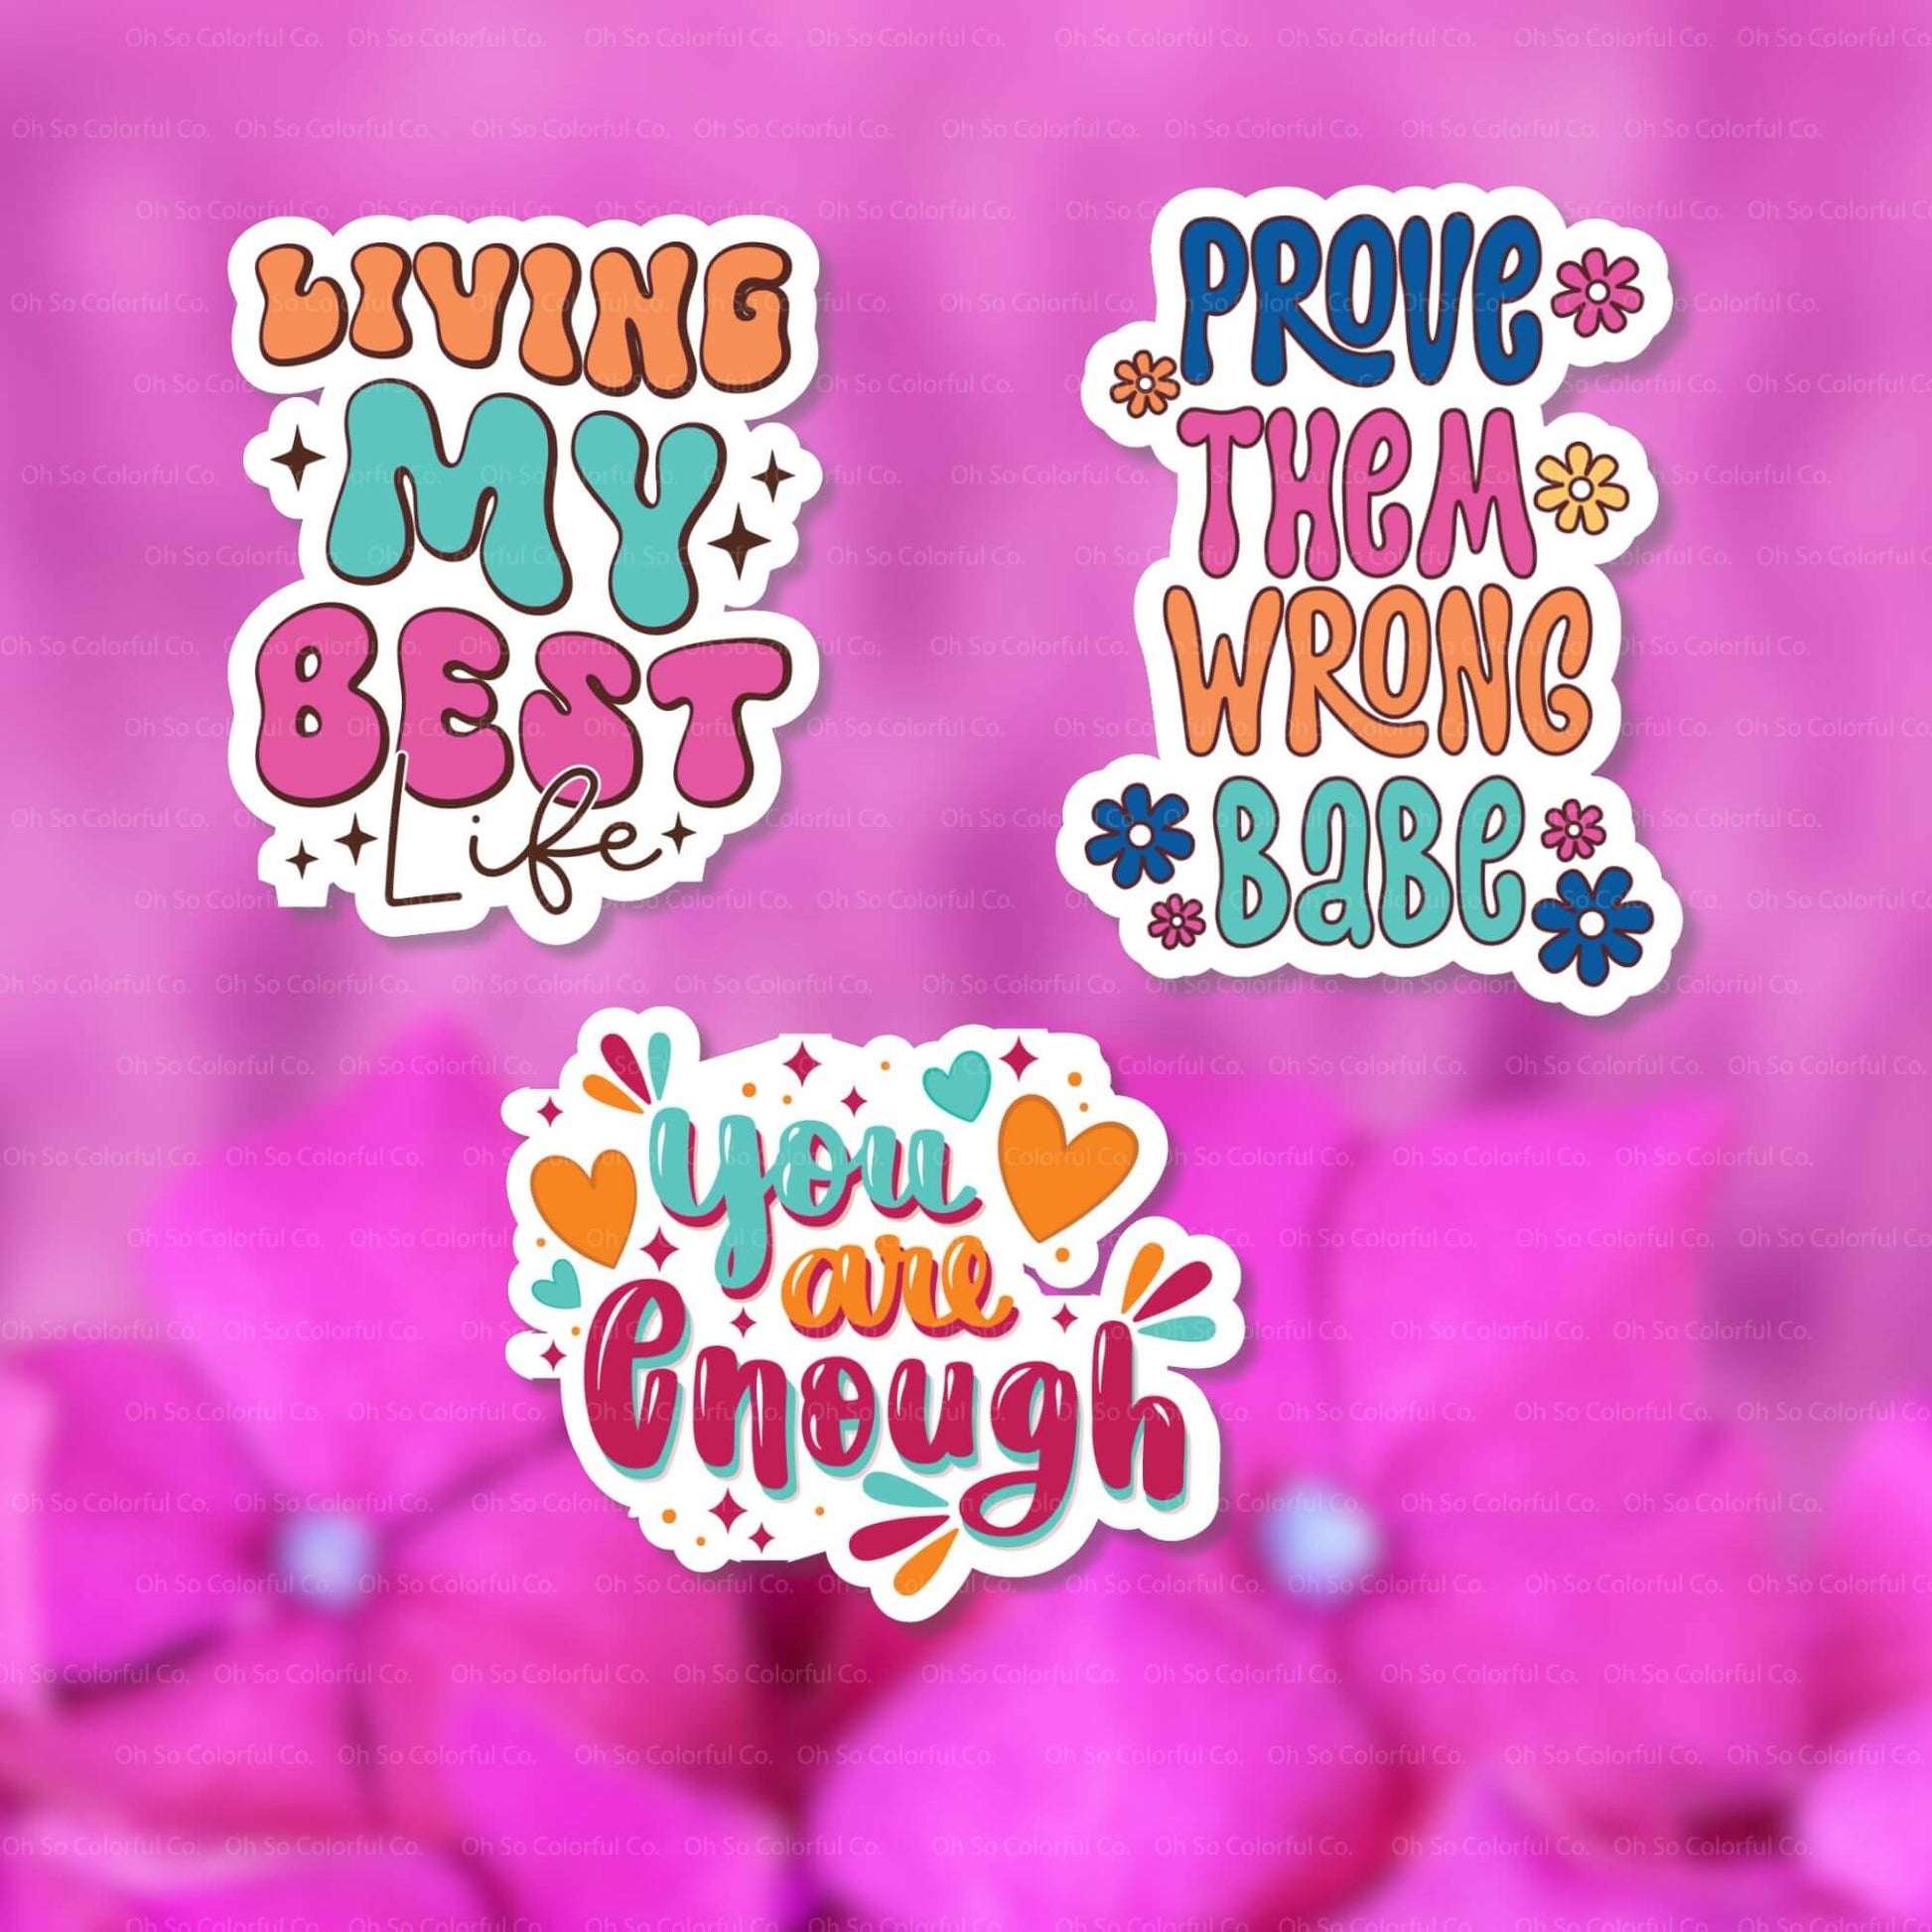 Water Bottle Stickers, Positive Stickers, Stickers Pack of 7, Vinyl Stickers,  Motivational Stickers, Stickers for Water Bottles,laptop Decal 